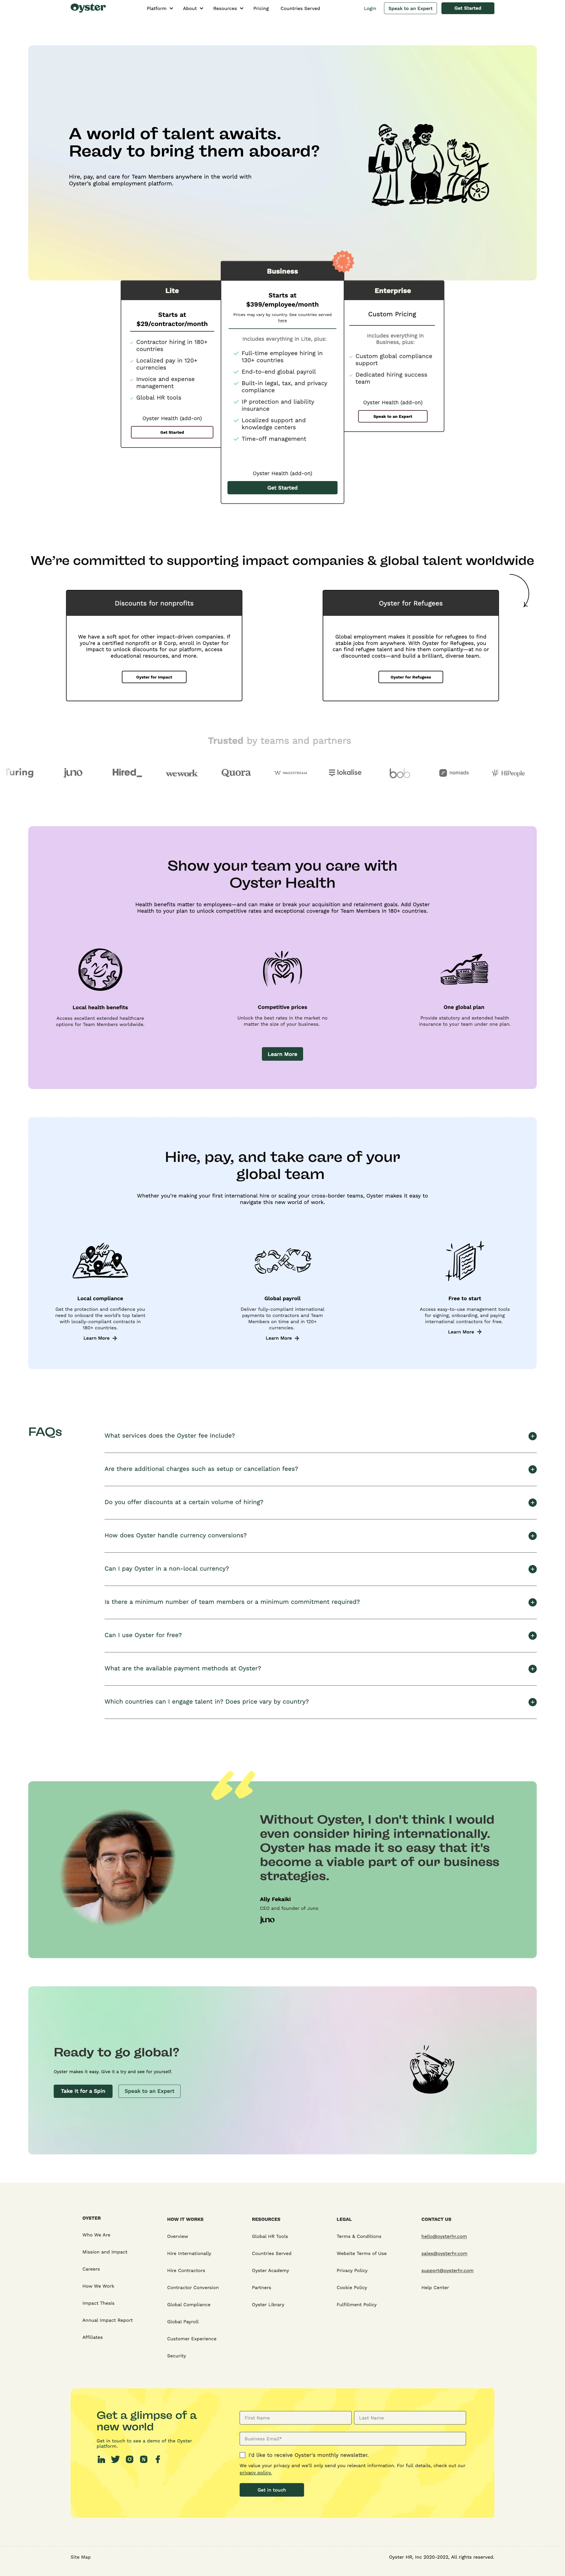 Oyster Landing Page Example: Hire anywhere, thrive everywhere. Meet your trusted partner for expanding teams across borders. Hire, pay, and care for talent around the world with Oyster.